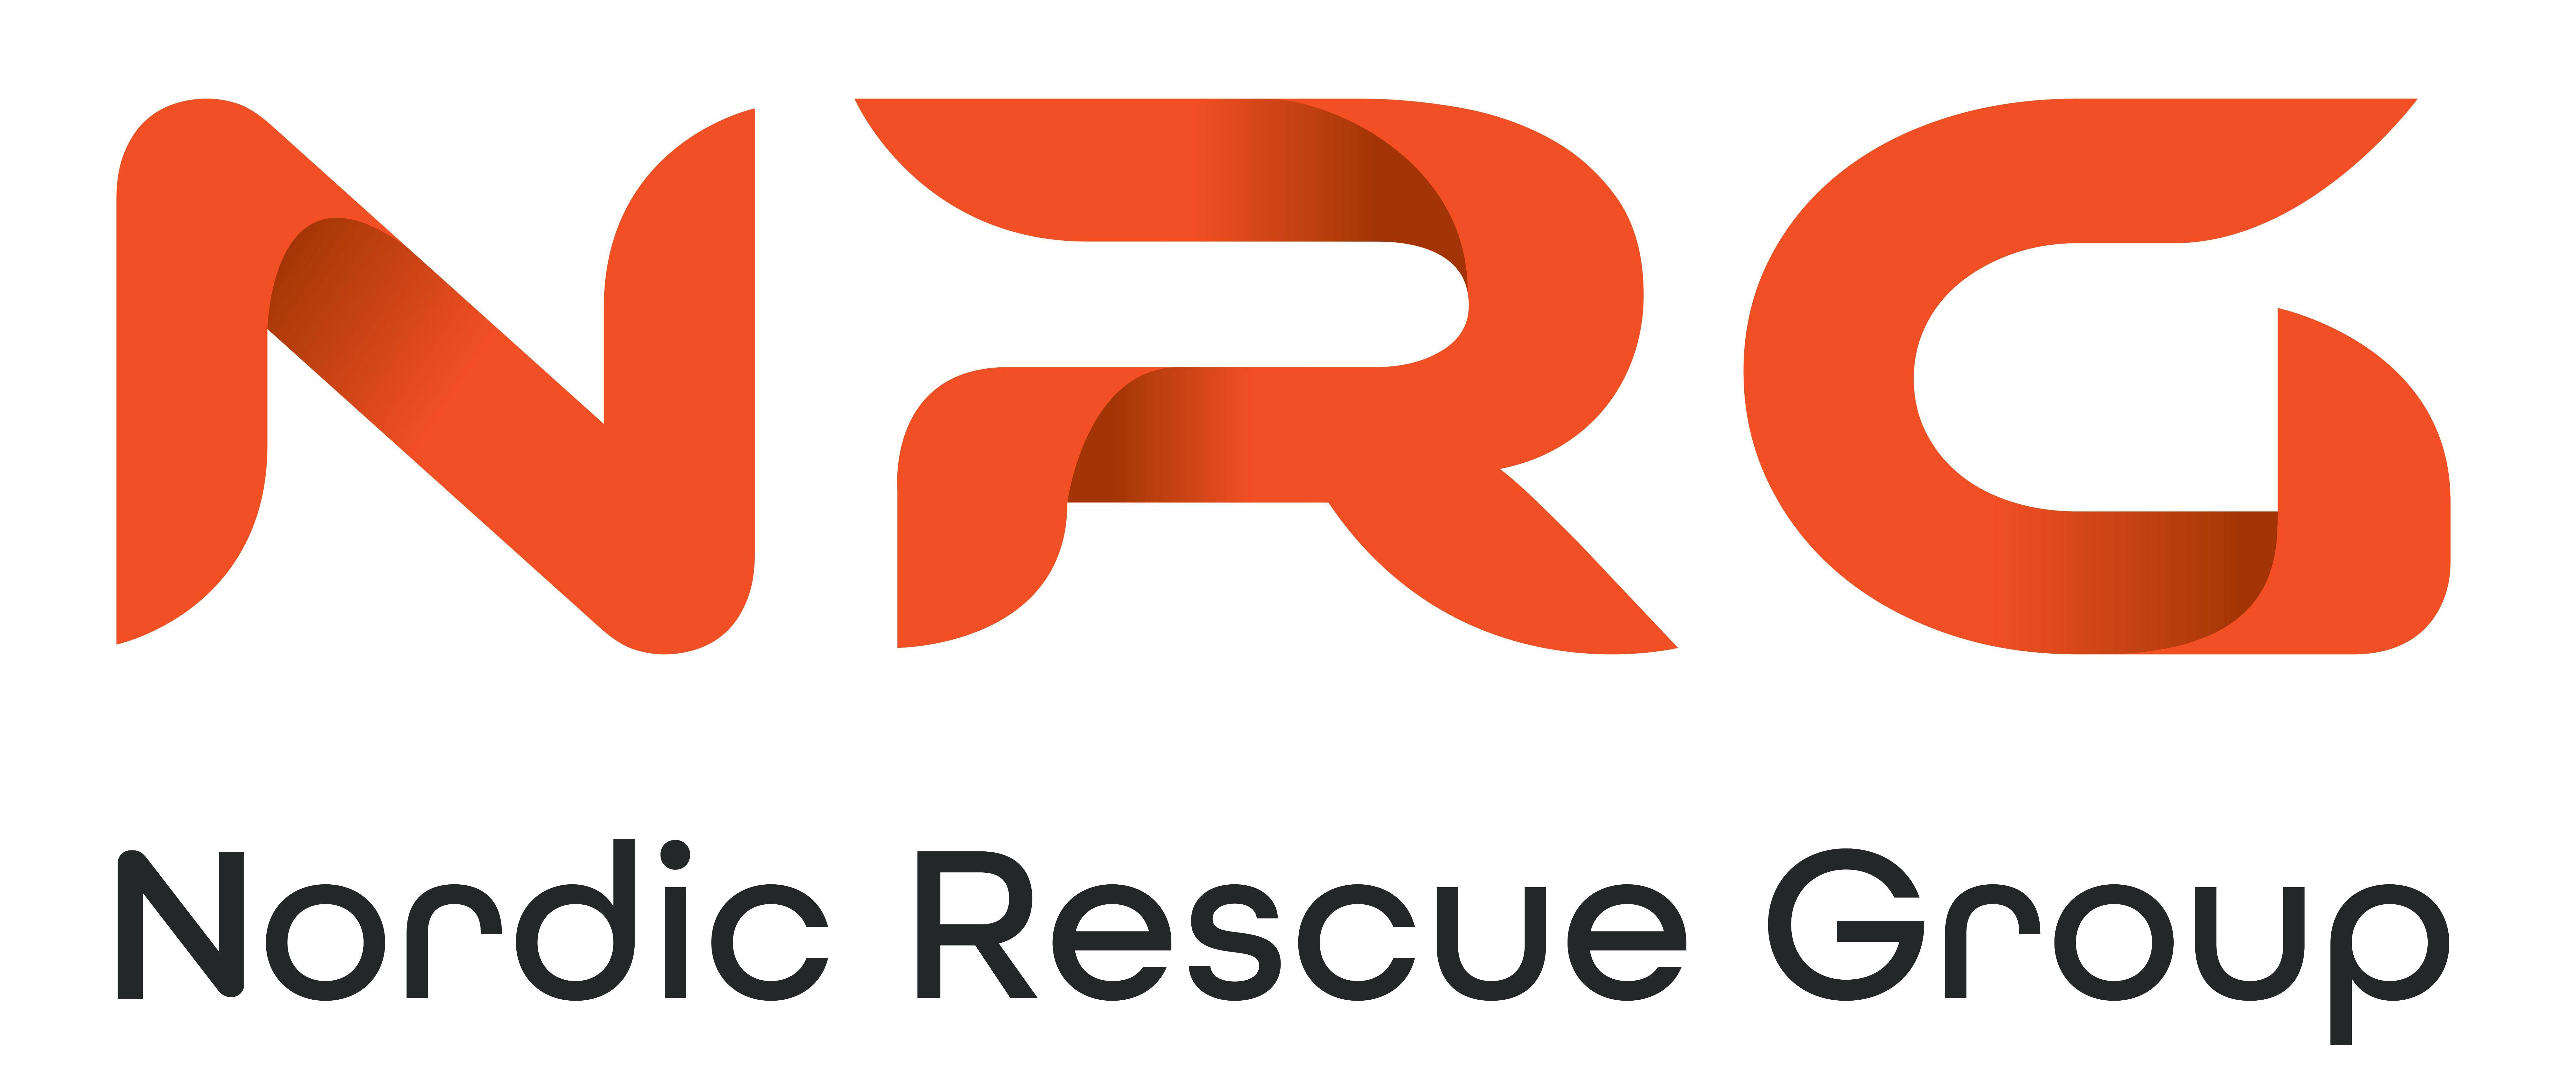 Nordic Rescue Group